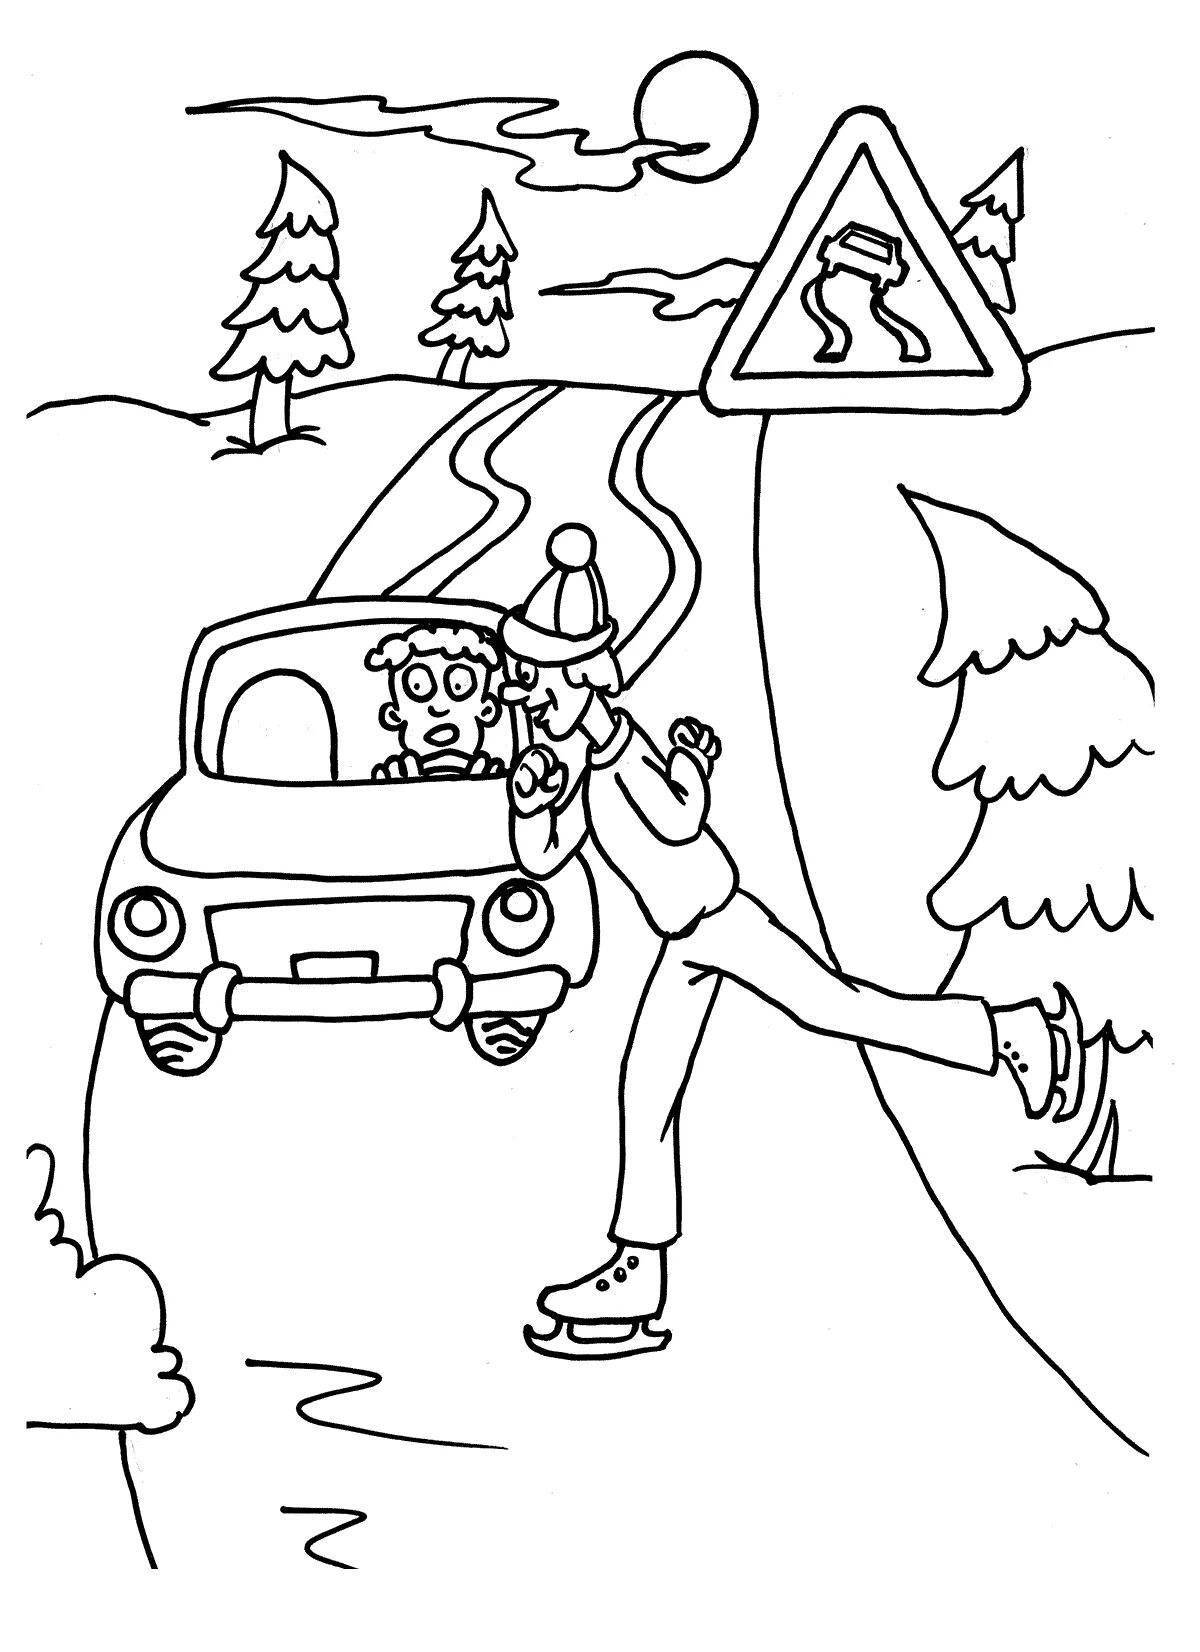 Coloring book innovative winter safety rules